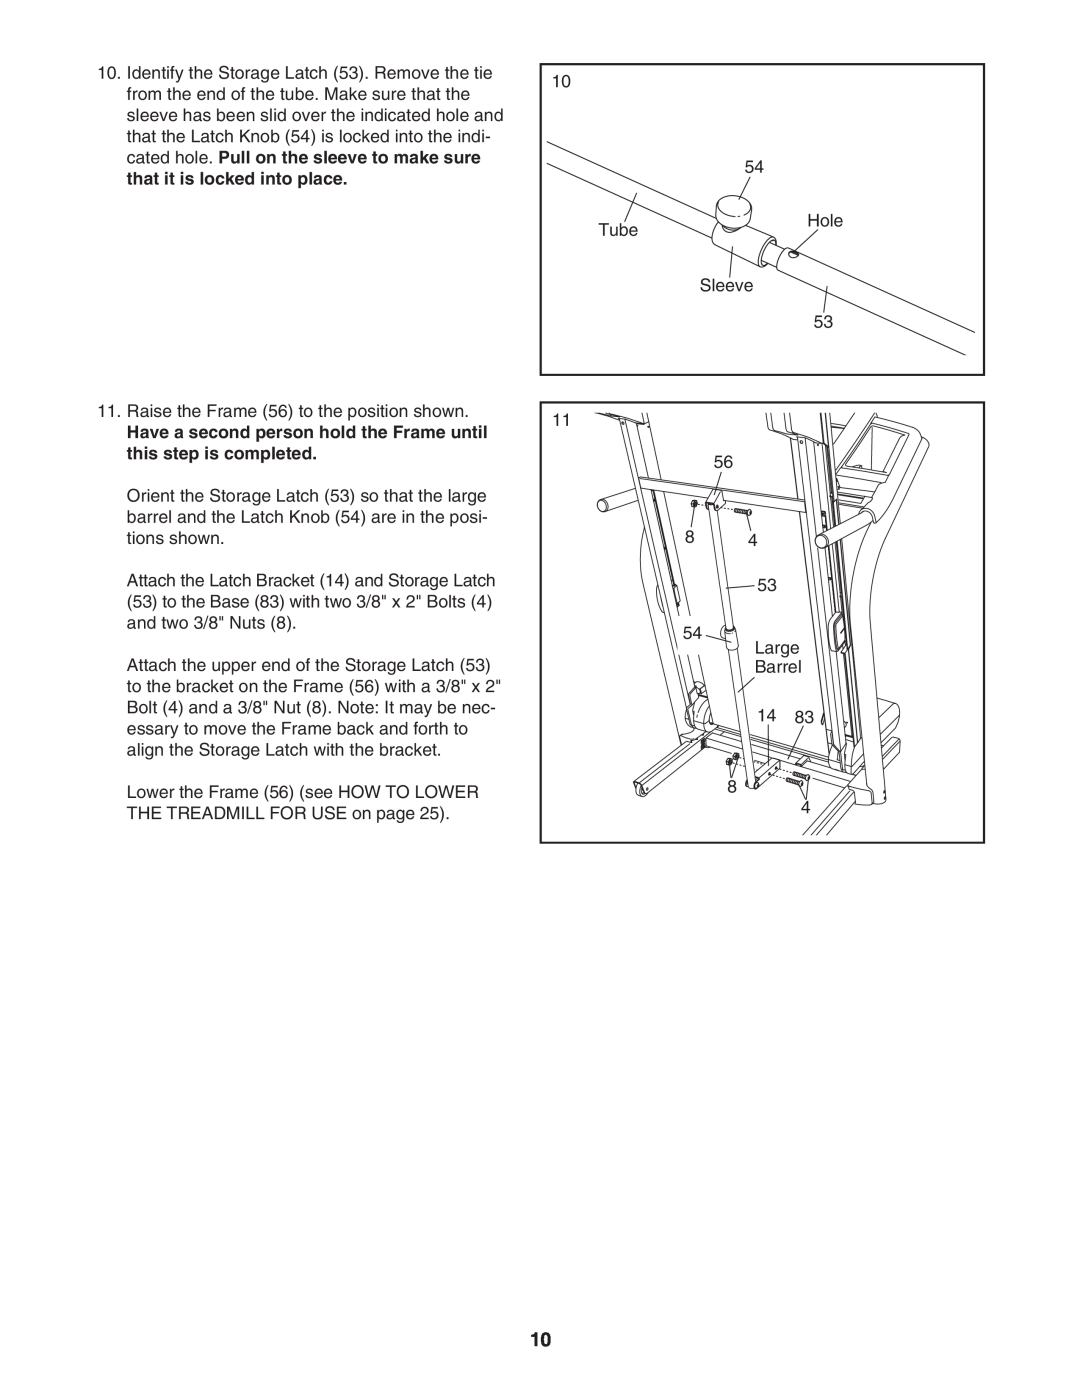 NordicTrack NTL09007.0 user manual Have a second person hold the Frame until this step is completed 